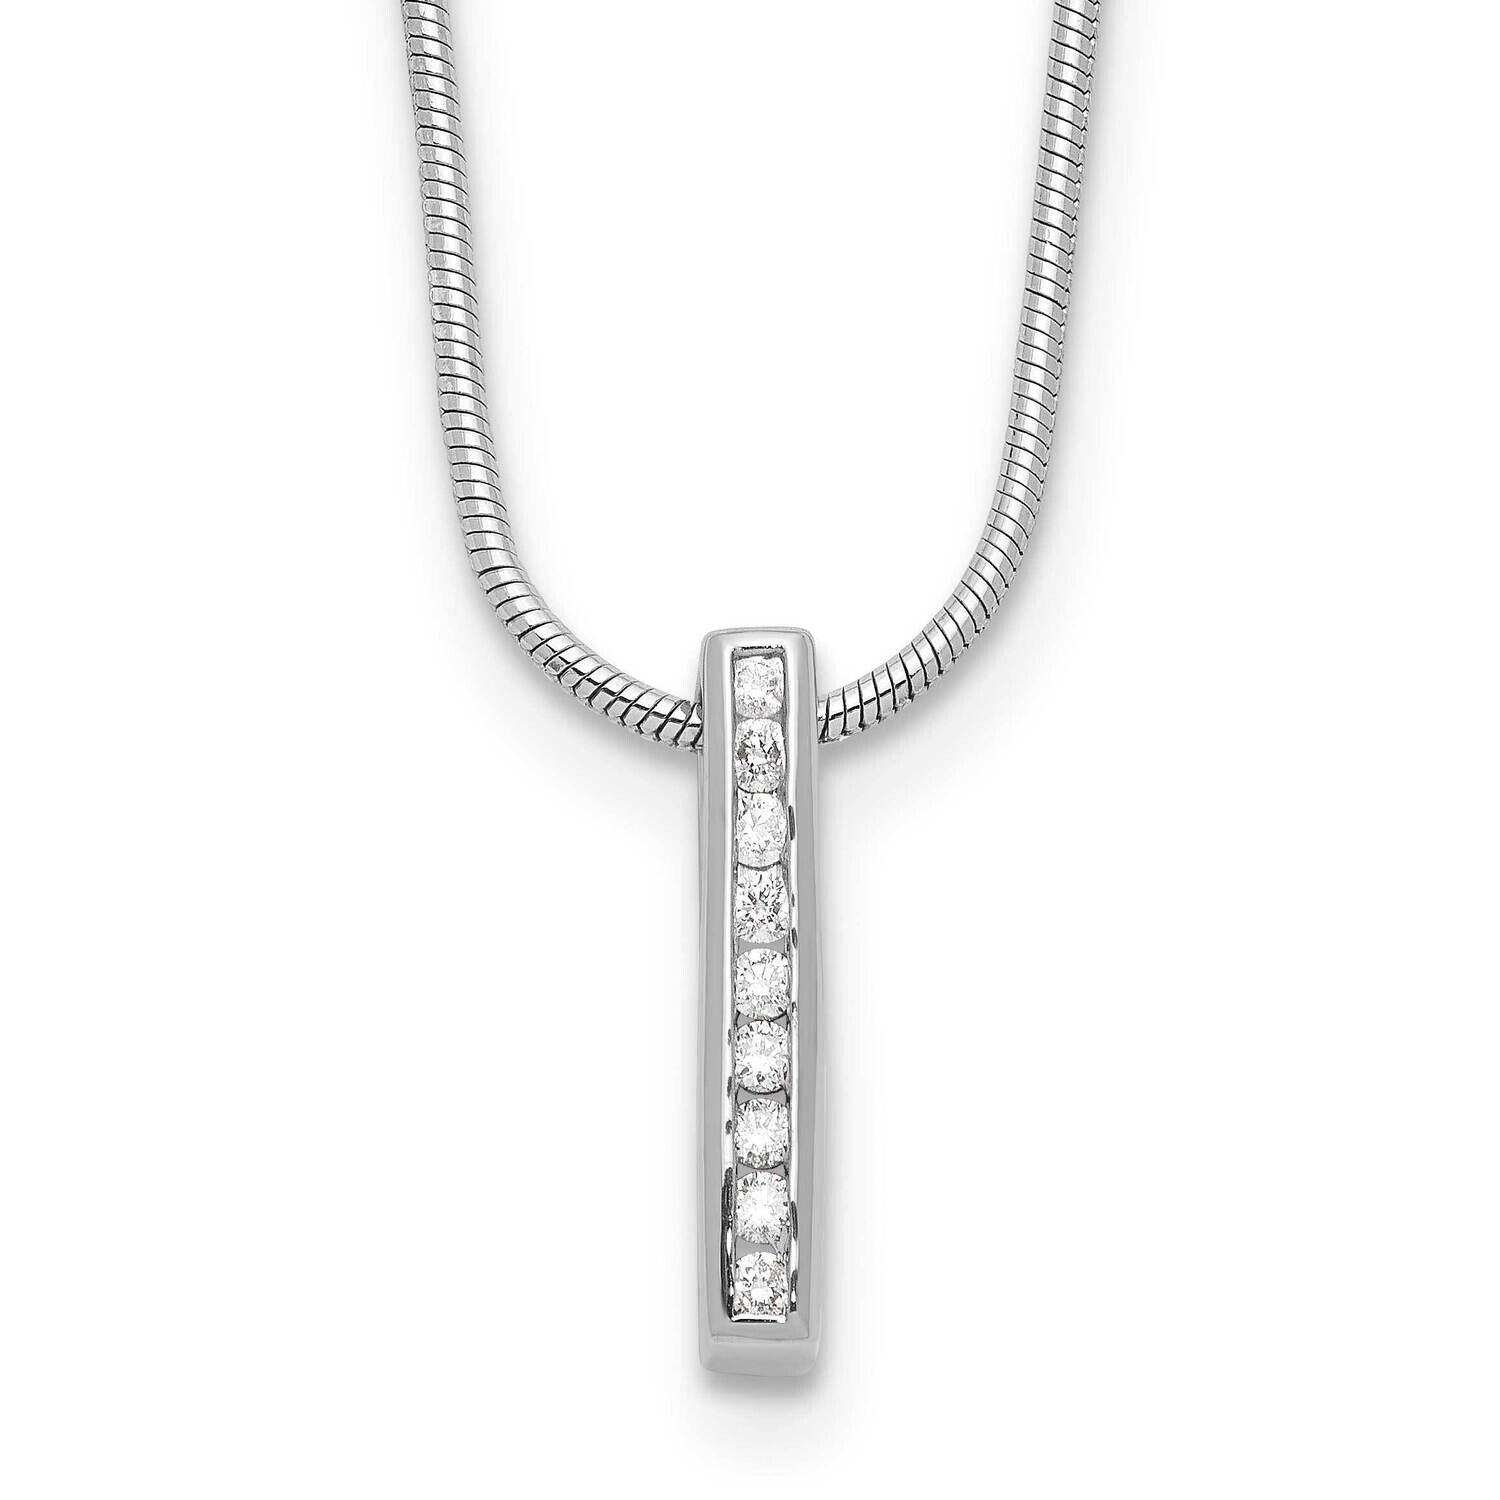 Rh Plated White Ice .10Ct. Diamond 2 Inch Extension Necklace Sterling Silver QW543-18